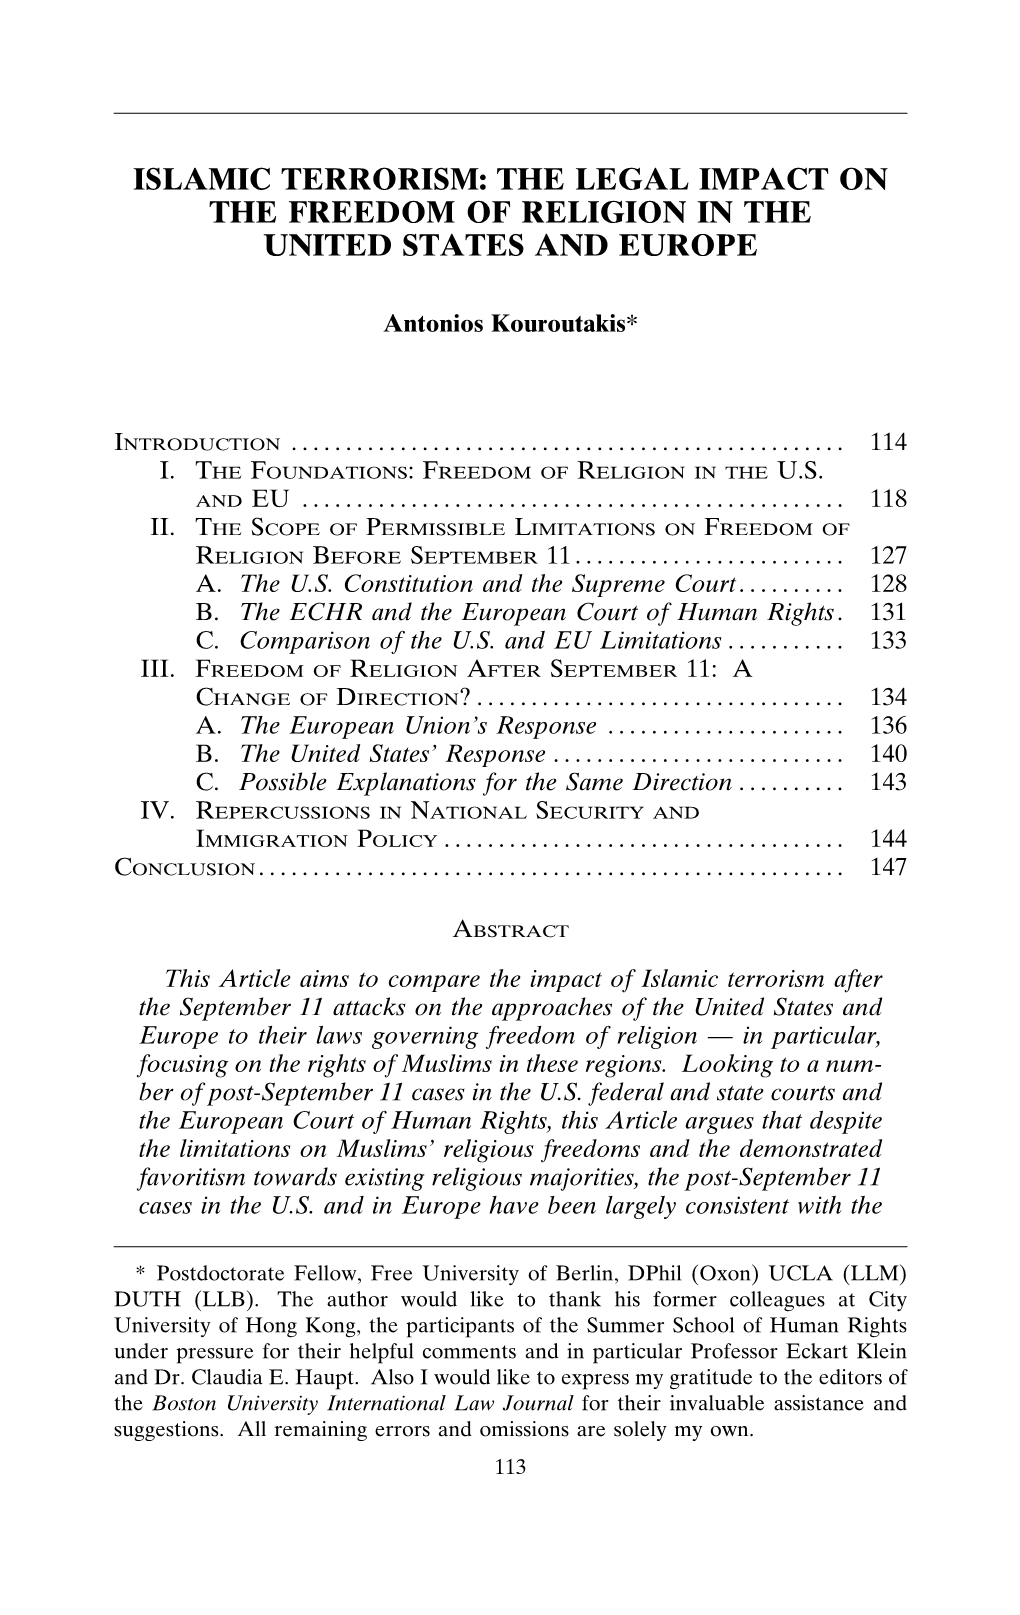 Islamic Terrorism: the Legal Impact on the Freedom of Religion in the United States and Europe